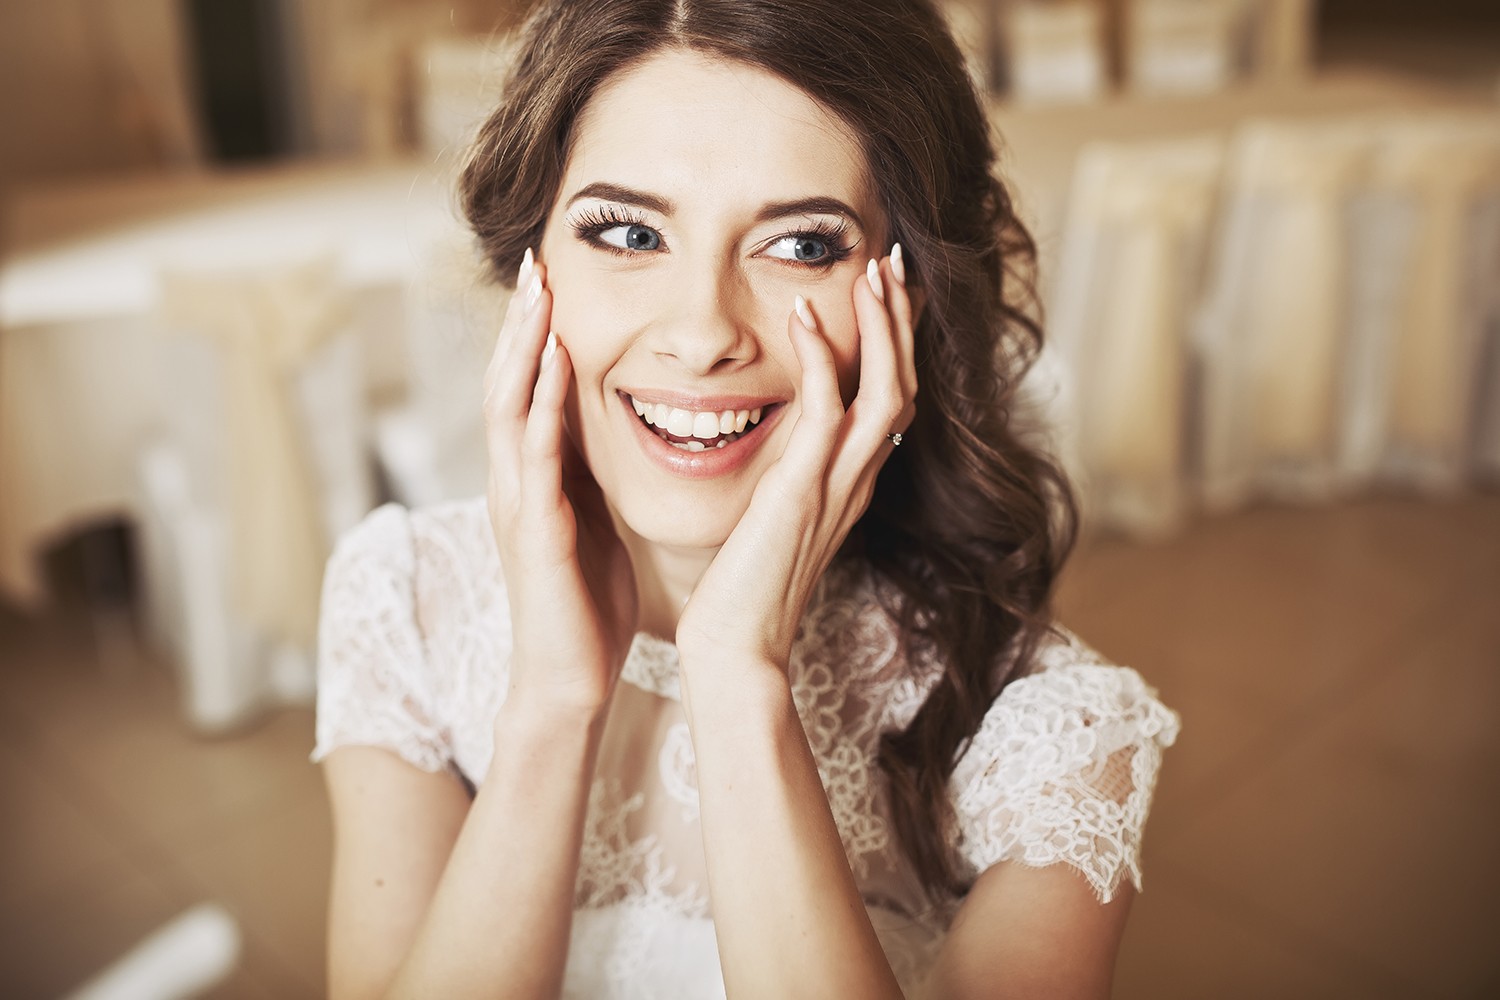 Wedding Beauty Guide - Bridal Beauty Wedding Prep Timeline - Wedding Beauty Plan and Health: How to Prep for Your Wedding featured by popular Los Angeles cruely free beauty blogger, My Beauty Bunny